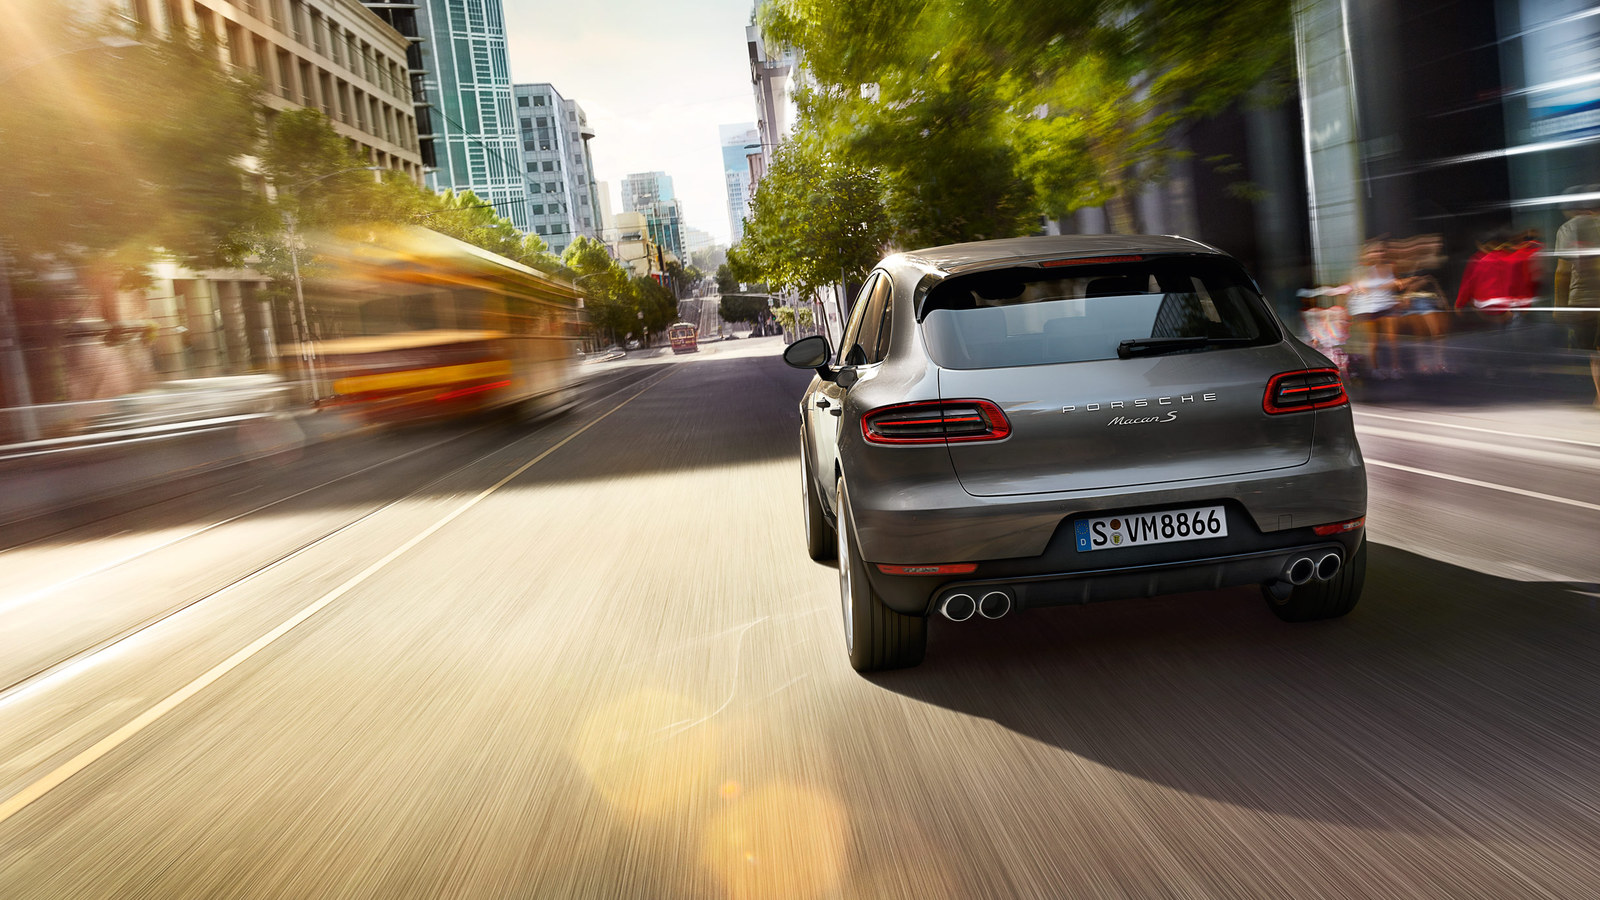 Porsche Macan S Diesel Hits 100 Km/H In 6.3S In Real World Tests - Autoevolution